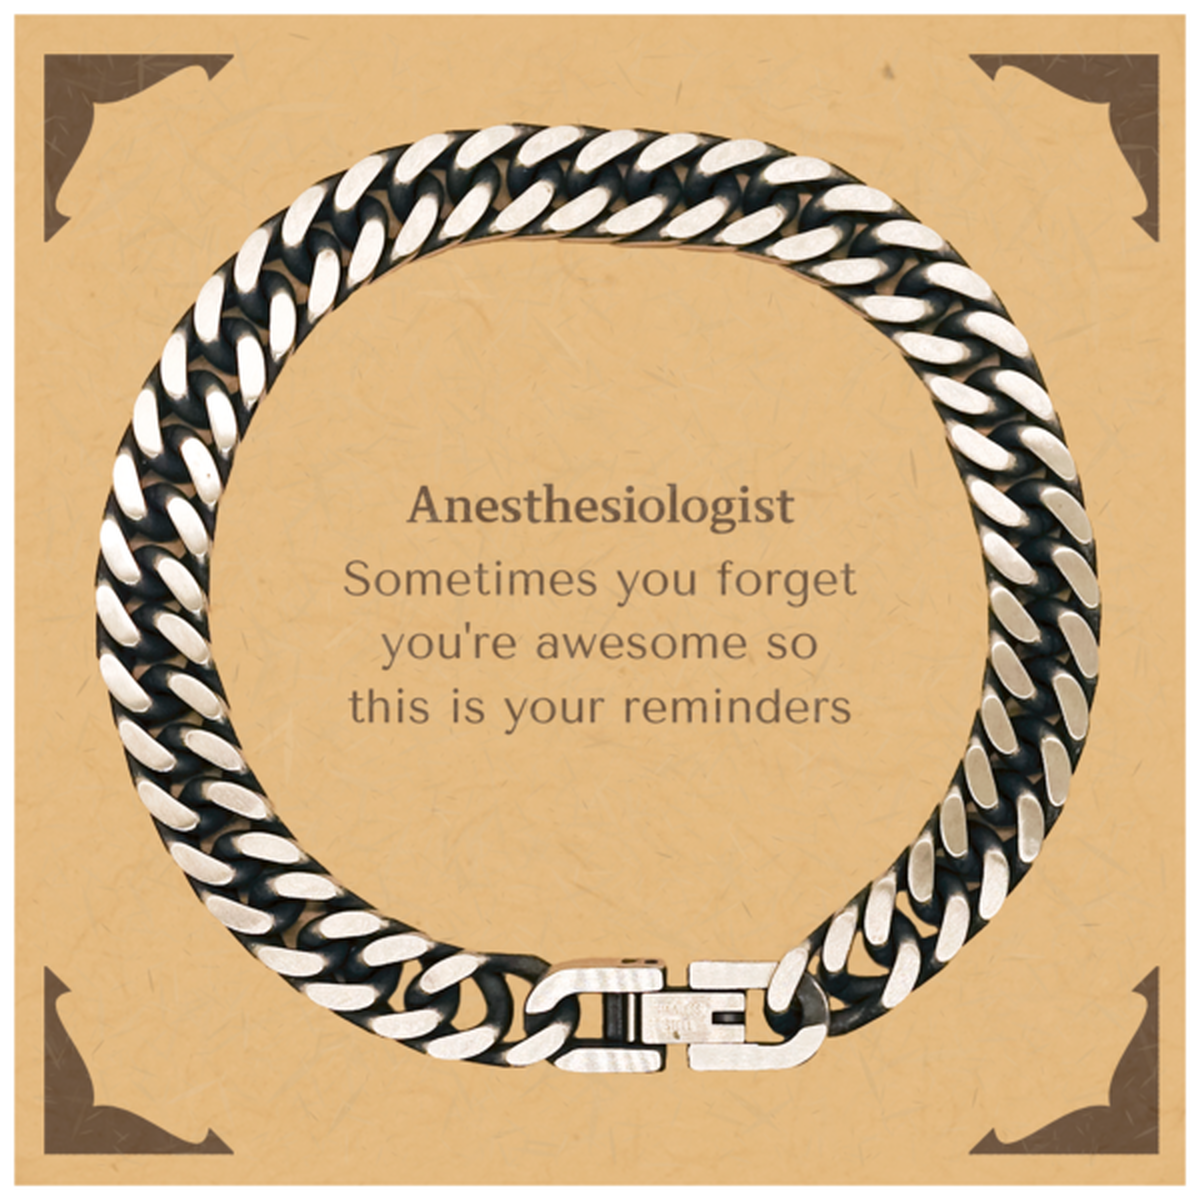 Sentimental Anesthesiologist Cuban Link Chain Bracelet, Anesthesiologist Sometimes you forget you're awesome so this is your reminders, Graduation Christmas Birthday Gifts for Anesthesiologist, Men, Women, Coworkers